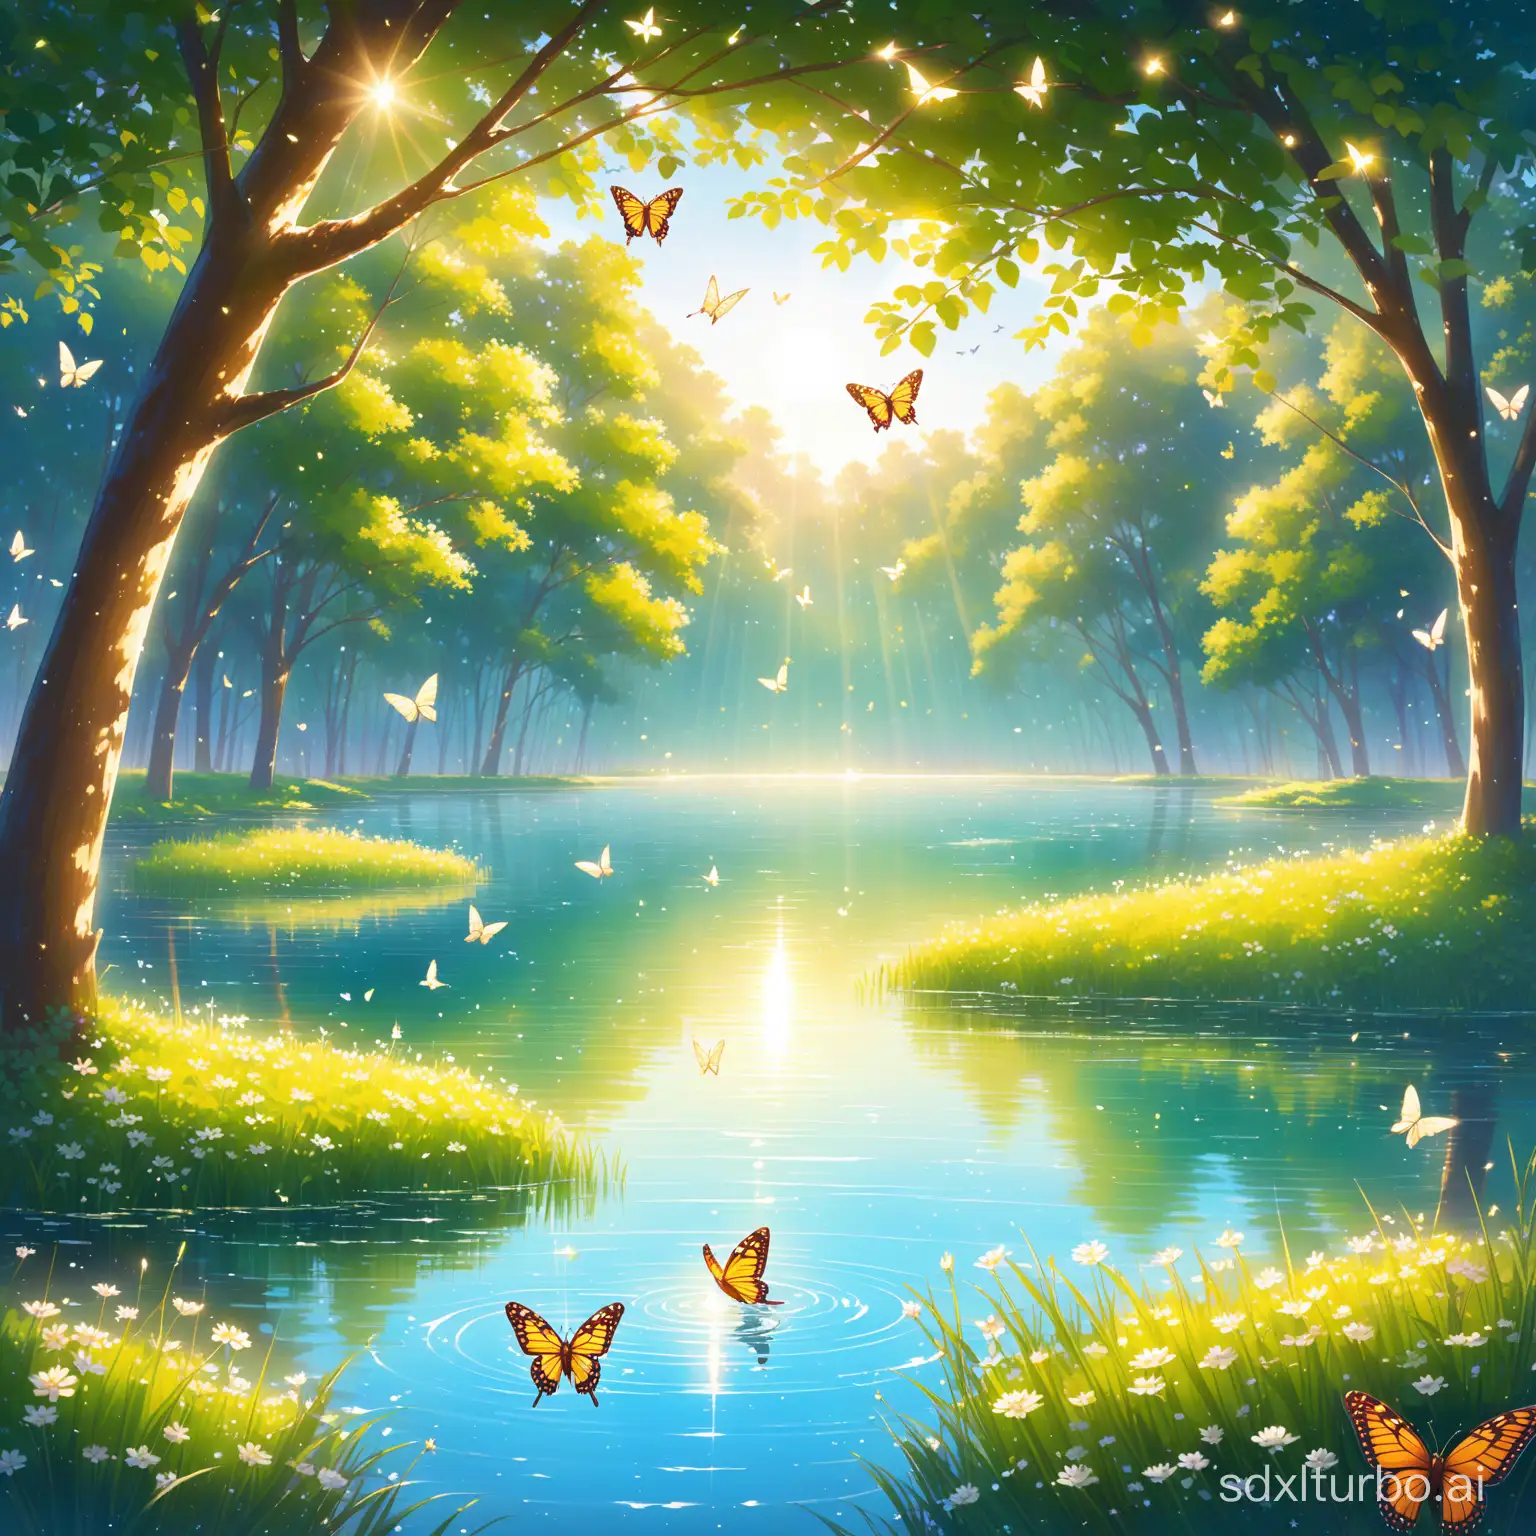 Sunlit-Lake-with-Butterflies-and-Birds-in-Serene-Nature